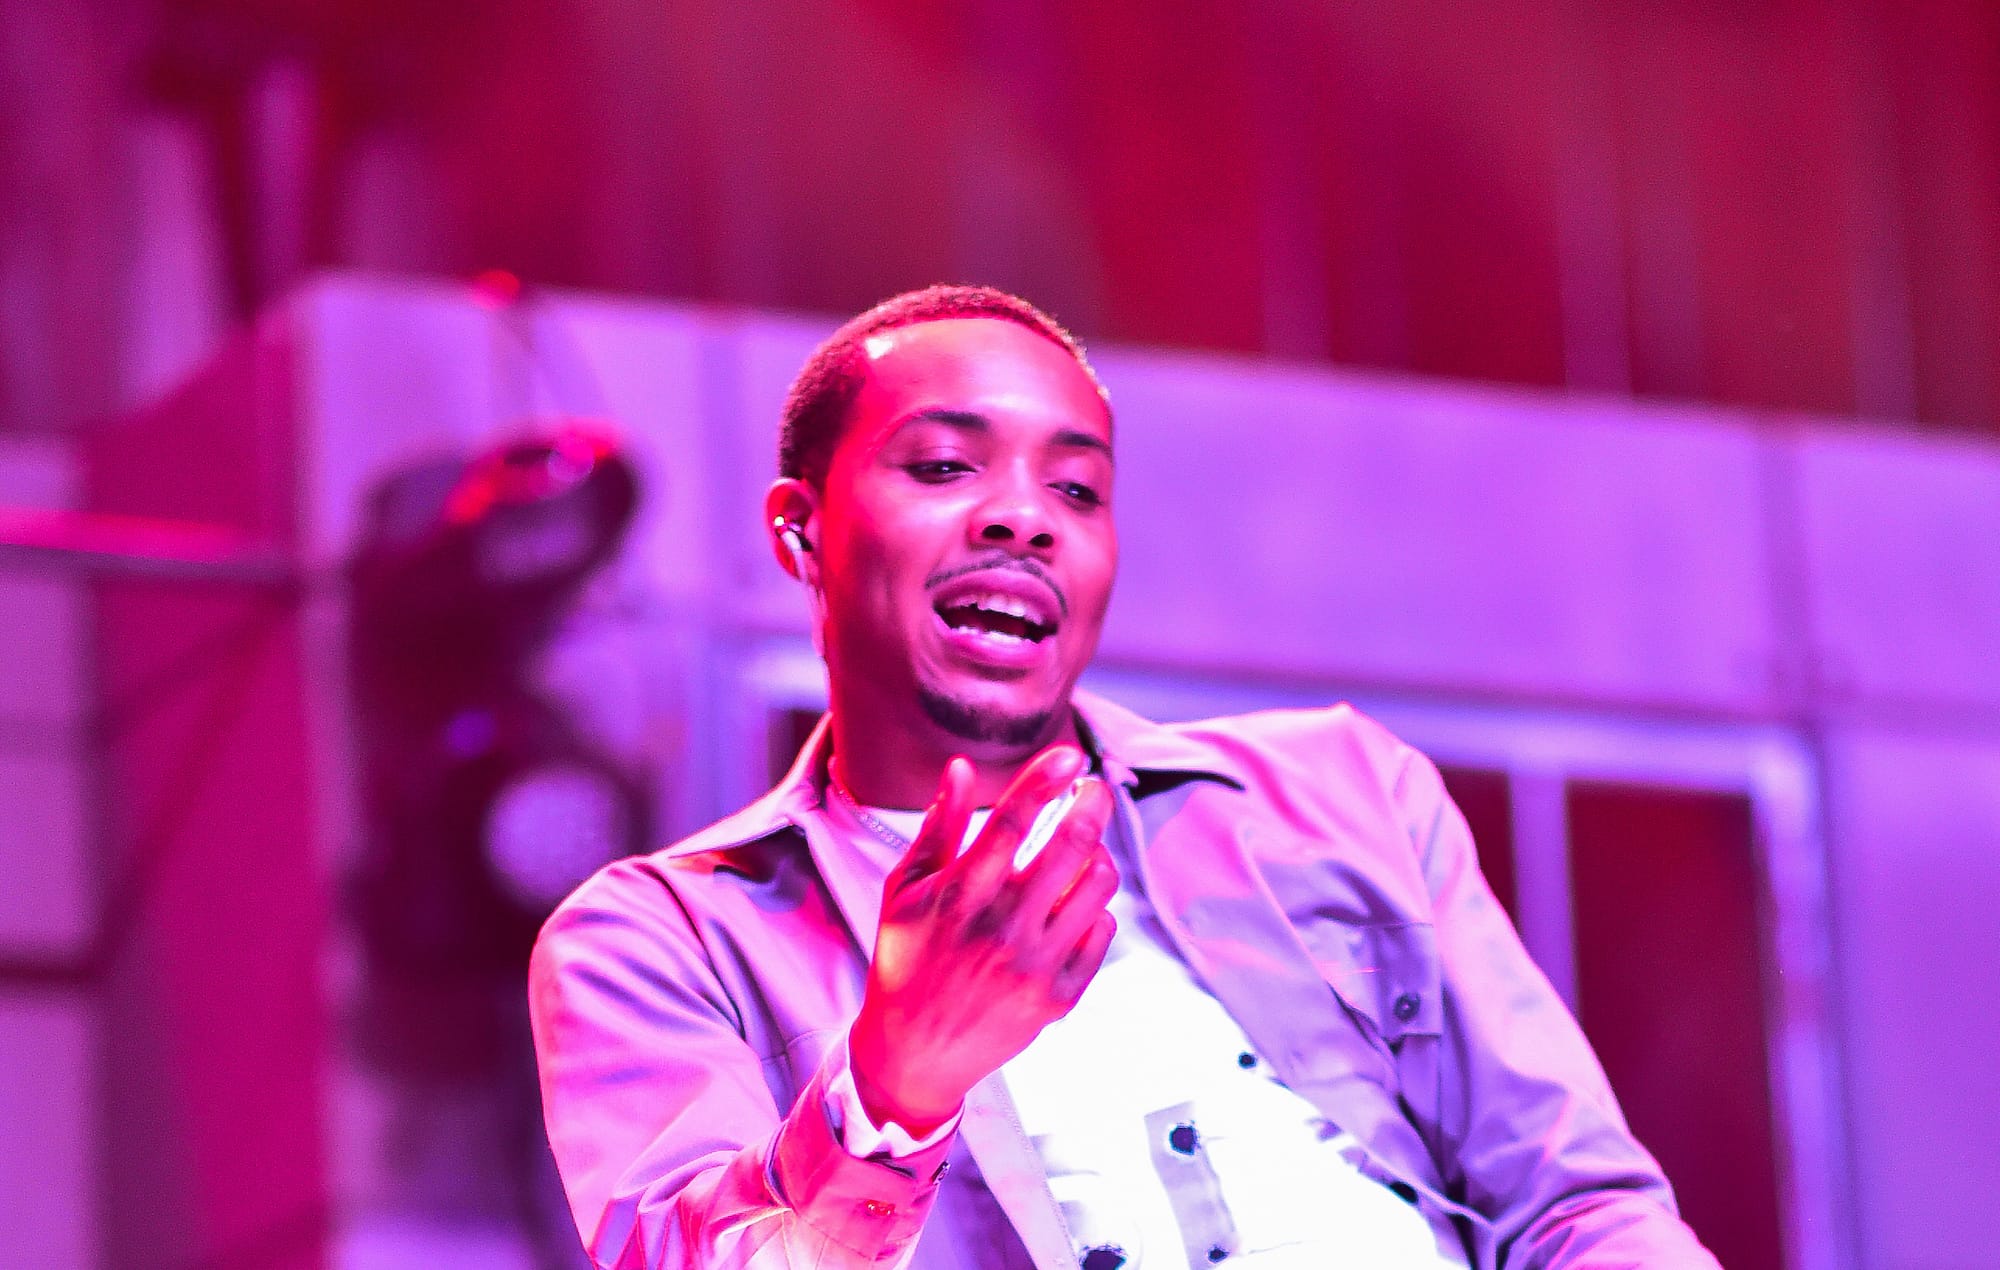 Double Standard Justice: Rapper G Herbo Made Over $1 Million in Wire Fraud & Evaded Prison Time